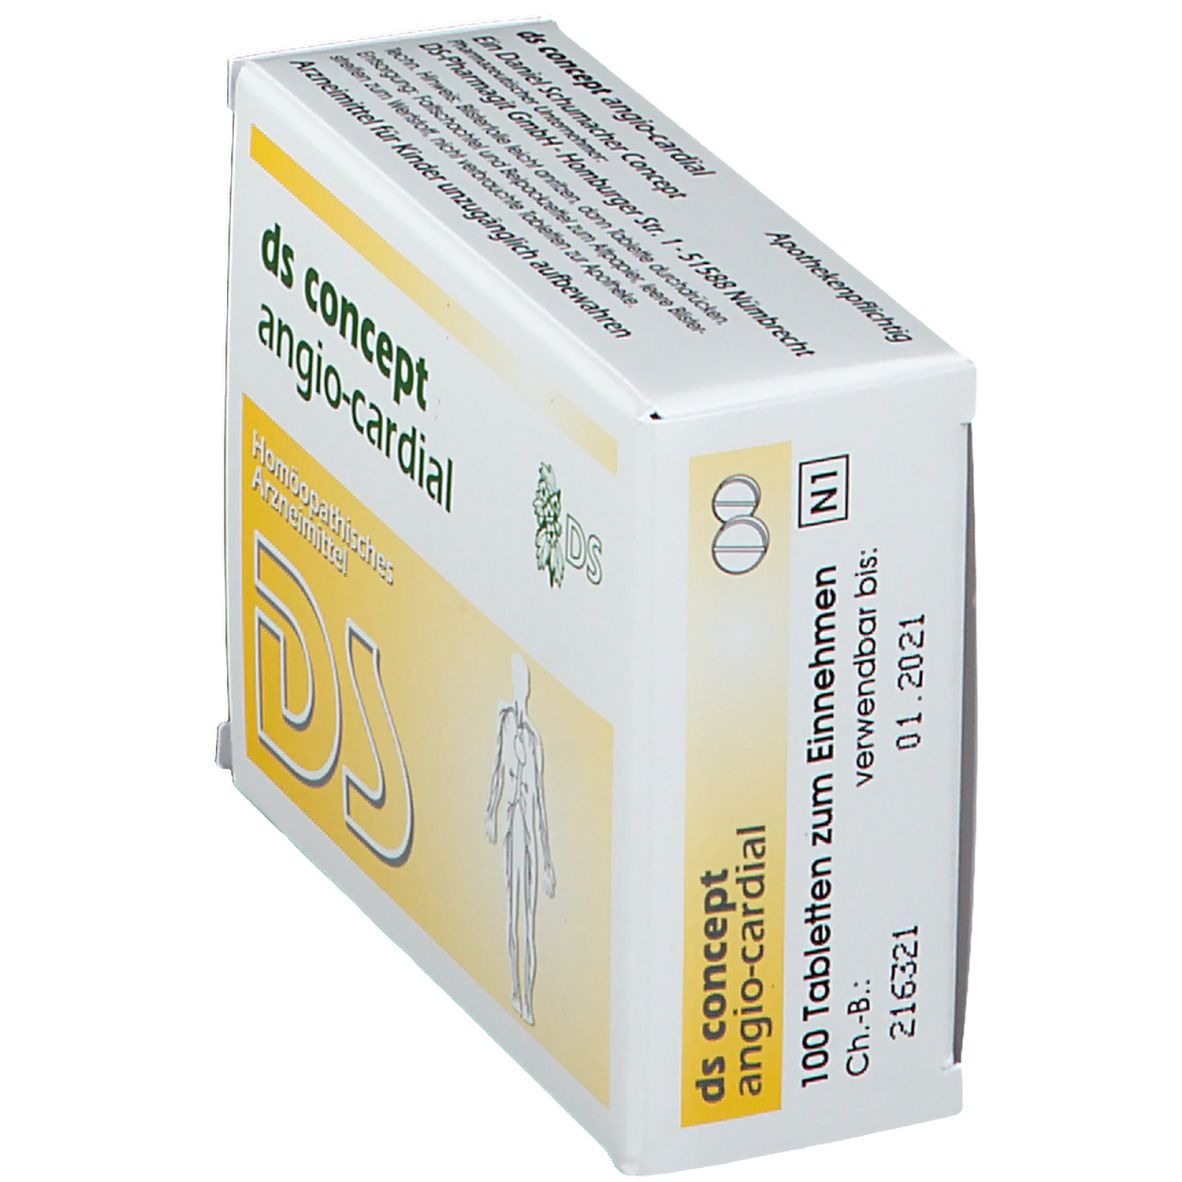 DS Concept Angio Cardial Tabletten